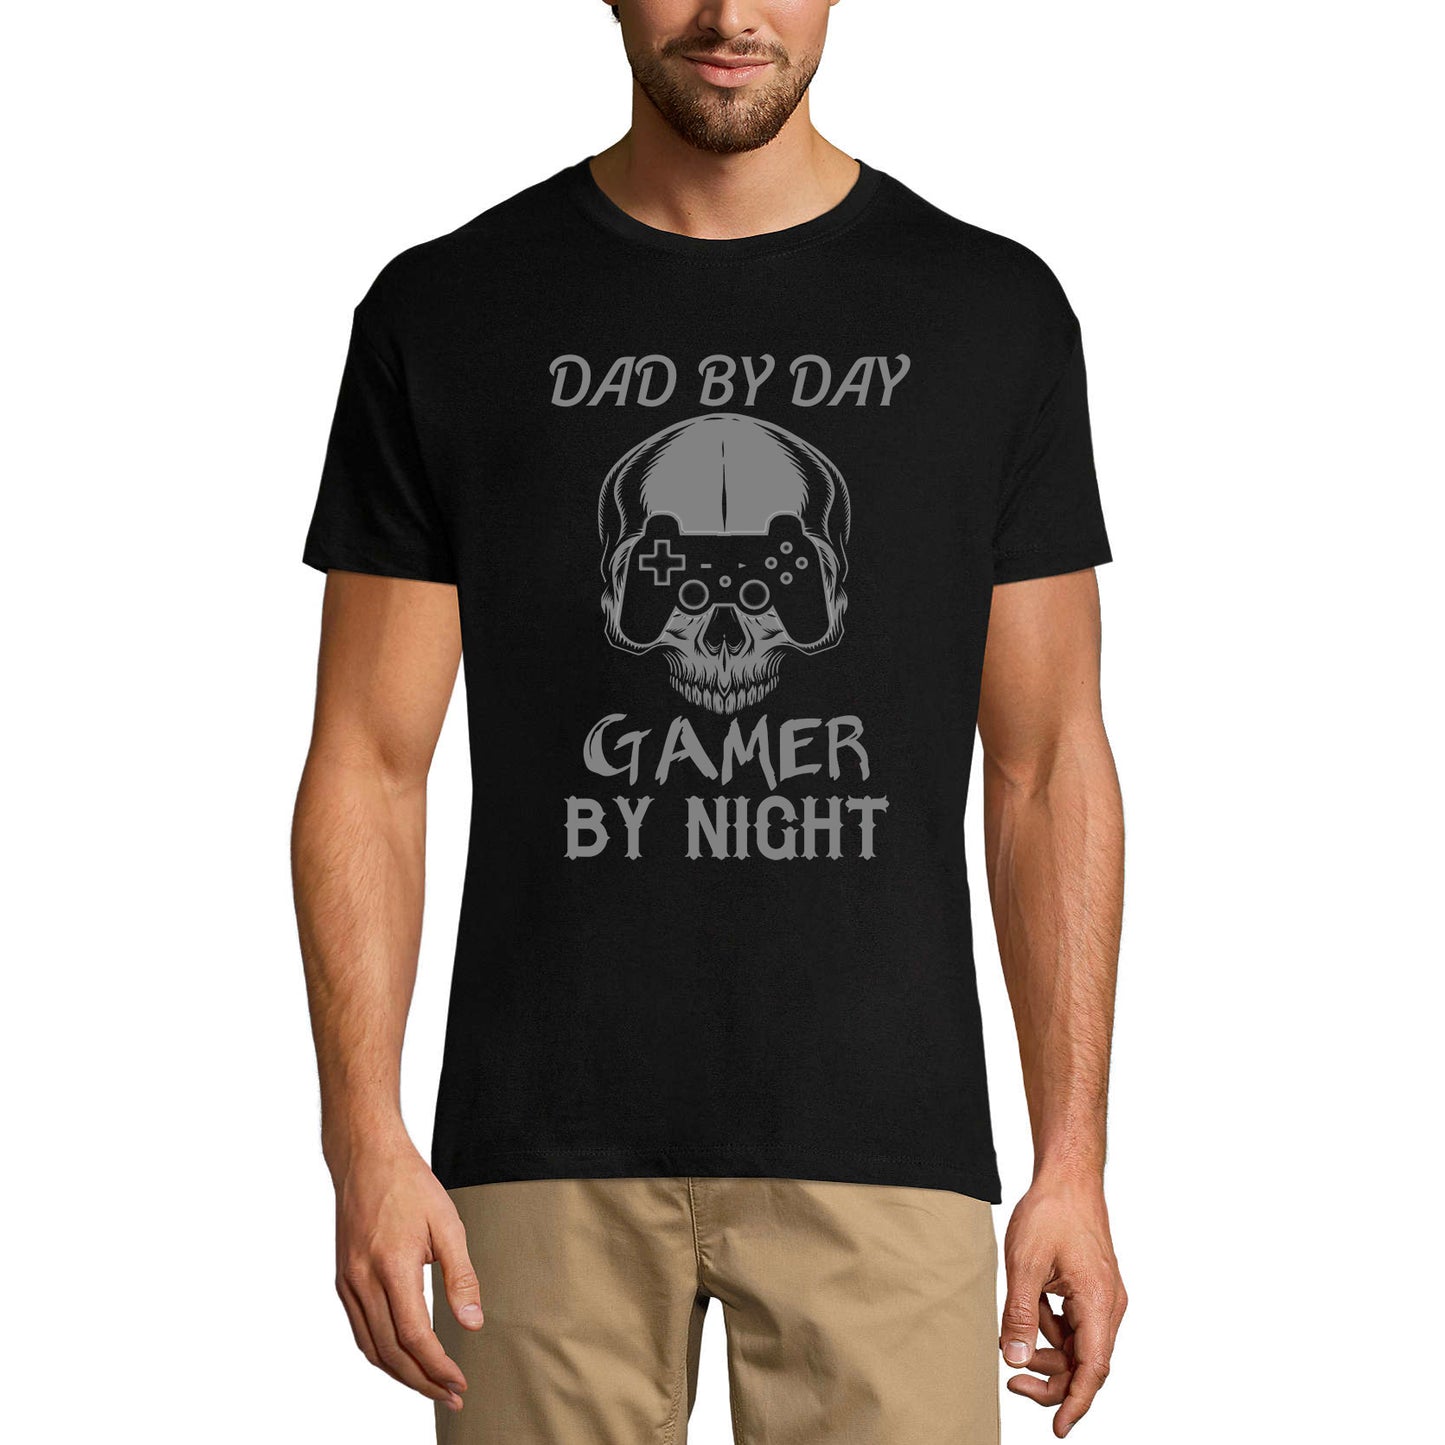 ULTRABASIC Men's Graphic Dad by Day Gamer by Night - Matching Shirts for Fathers mode on level up dad gamer i paused my game alien player ufo playstation tee shirt clothes gaming apparel gifts super mario nintendo call of duty graphic tshirt video game funny geek gift for the gamer fortnite pubg humor son father birthday